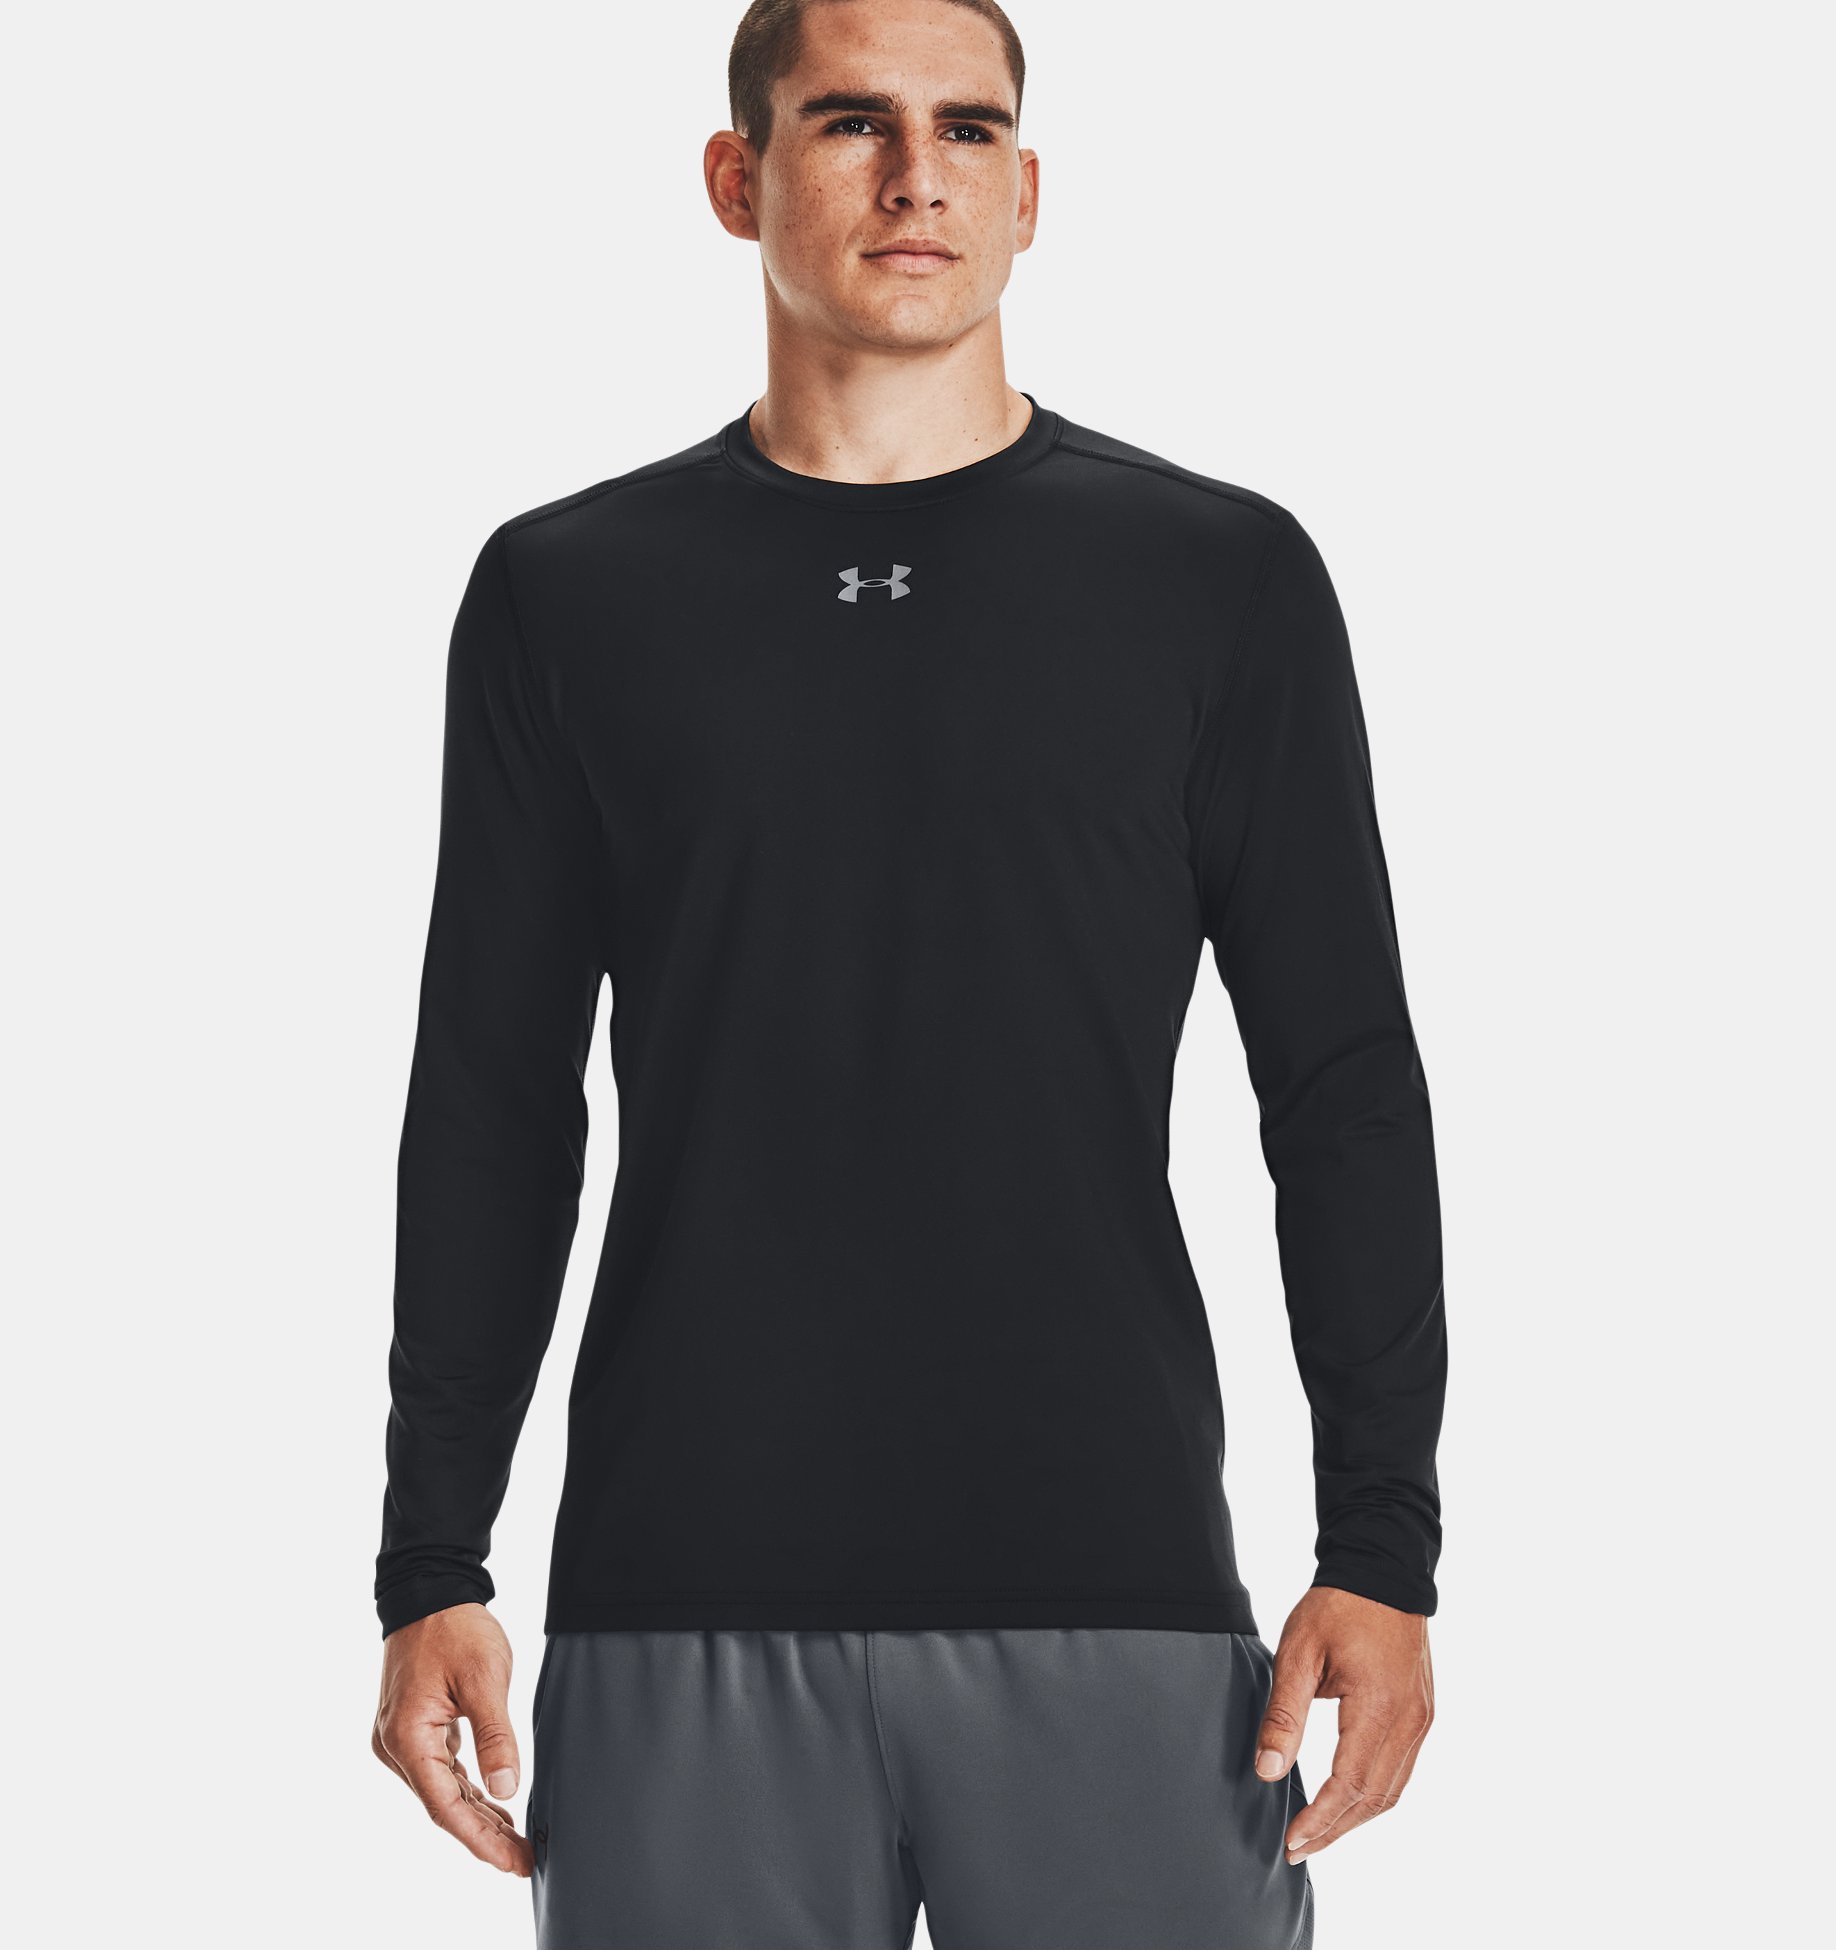 Under Armour 1332491001lg ColdGear Fitted Crew Black LG for sale online 